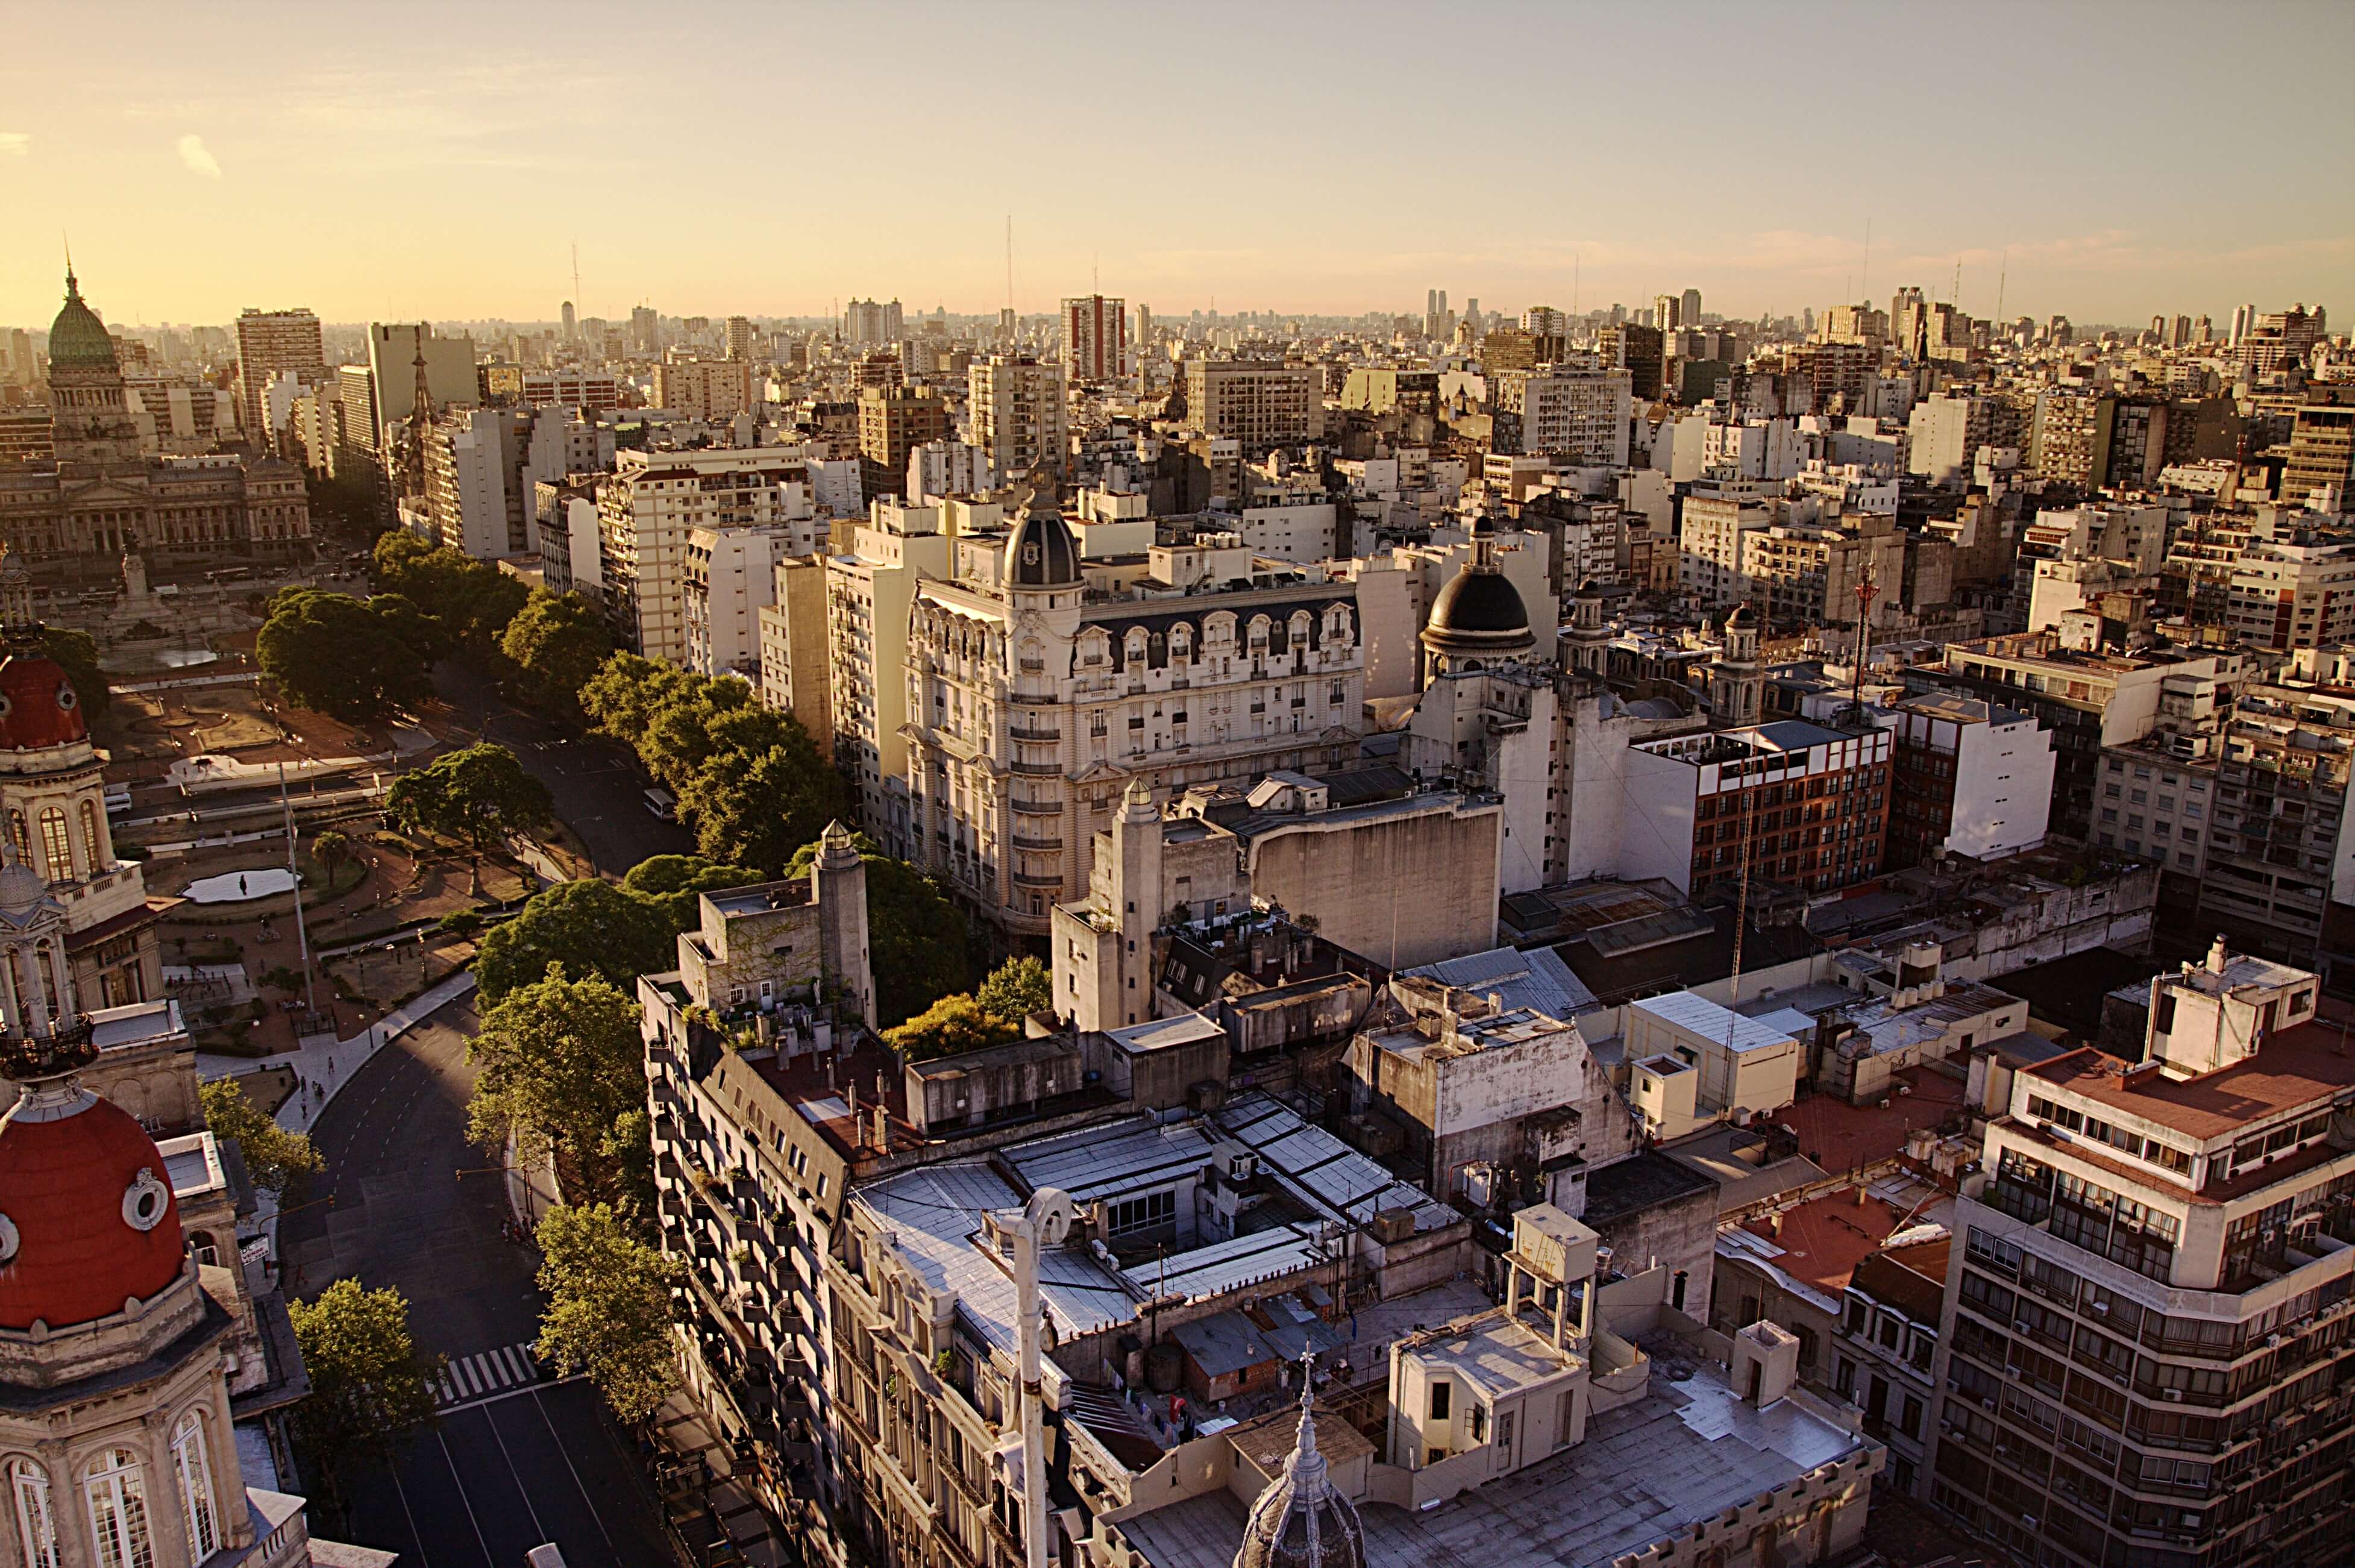 Q&A with Startup Buenos Aires founder: Argentina’s startup culture sees a boon